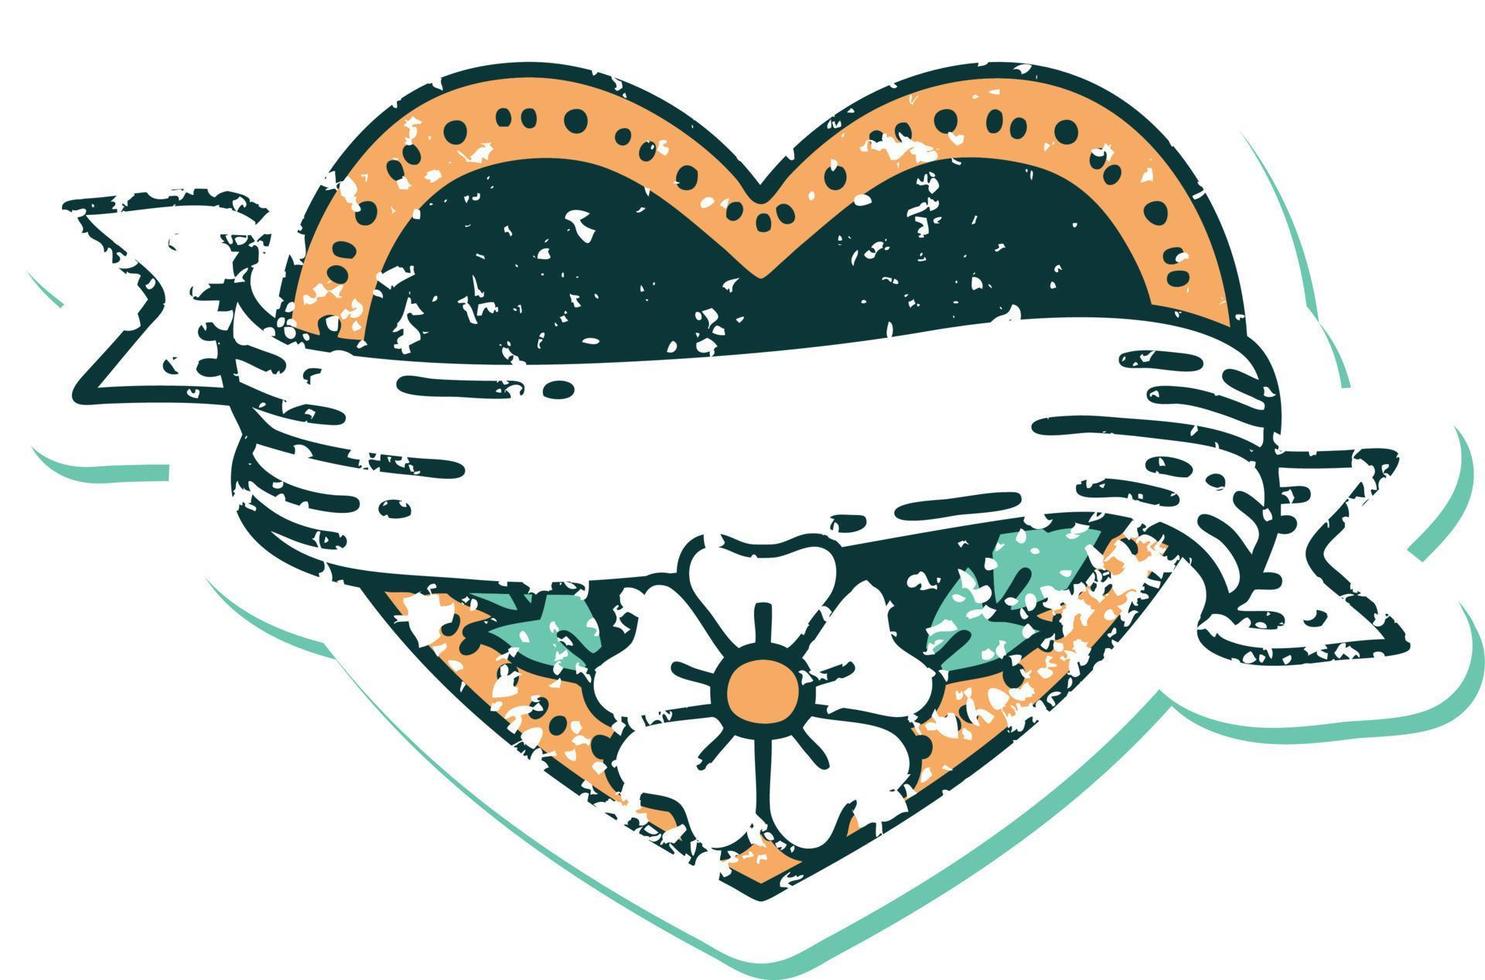 iconic distressed sticker tattoo style image of a heart and banner with flowers vector